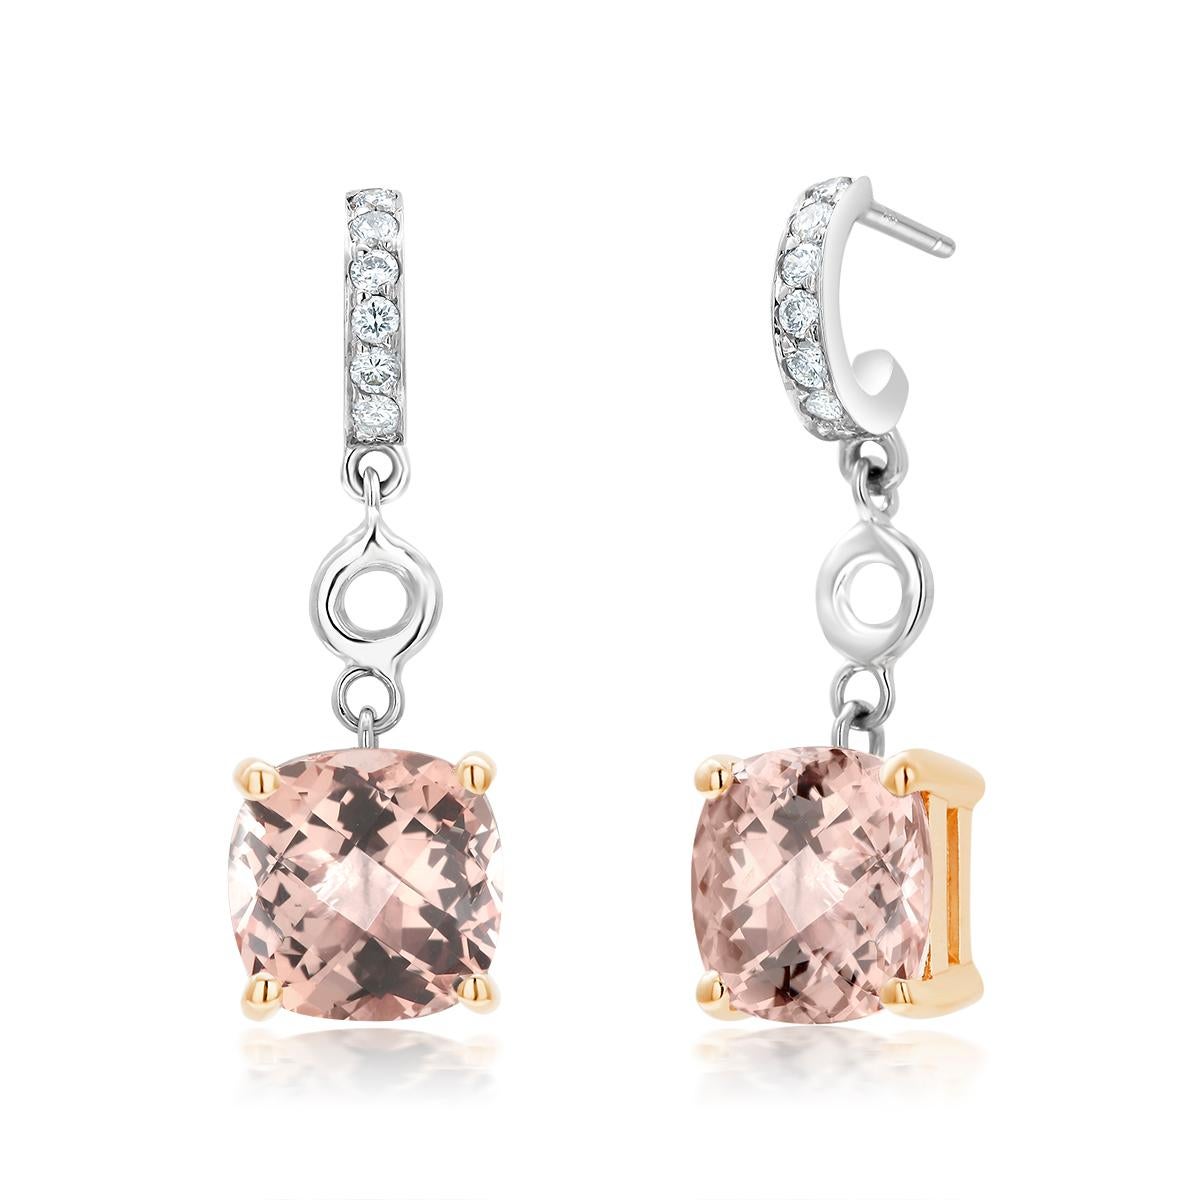 Contemporary Cushion Morganite and Diamond White Gold Hoop Drop Earrings Weighing 4.28 Carats